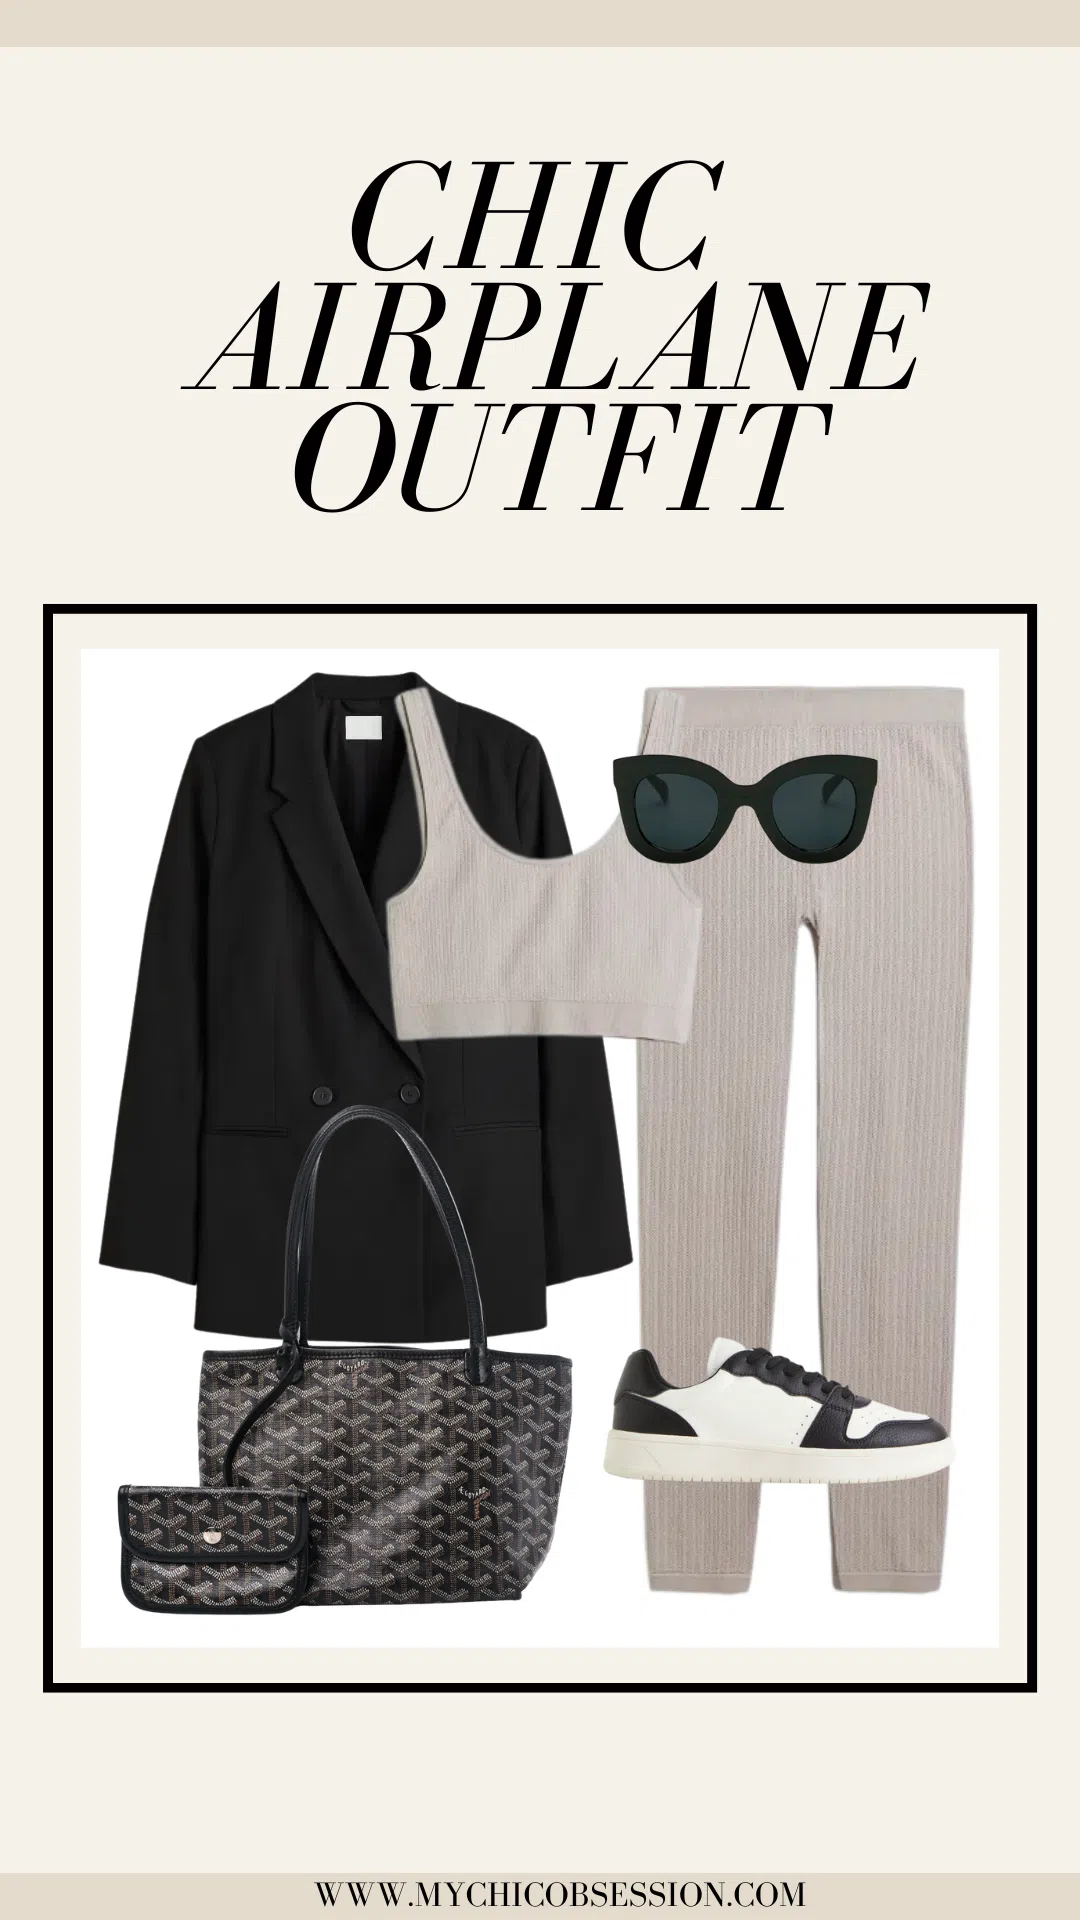 chic airplane outfit